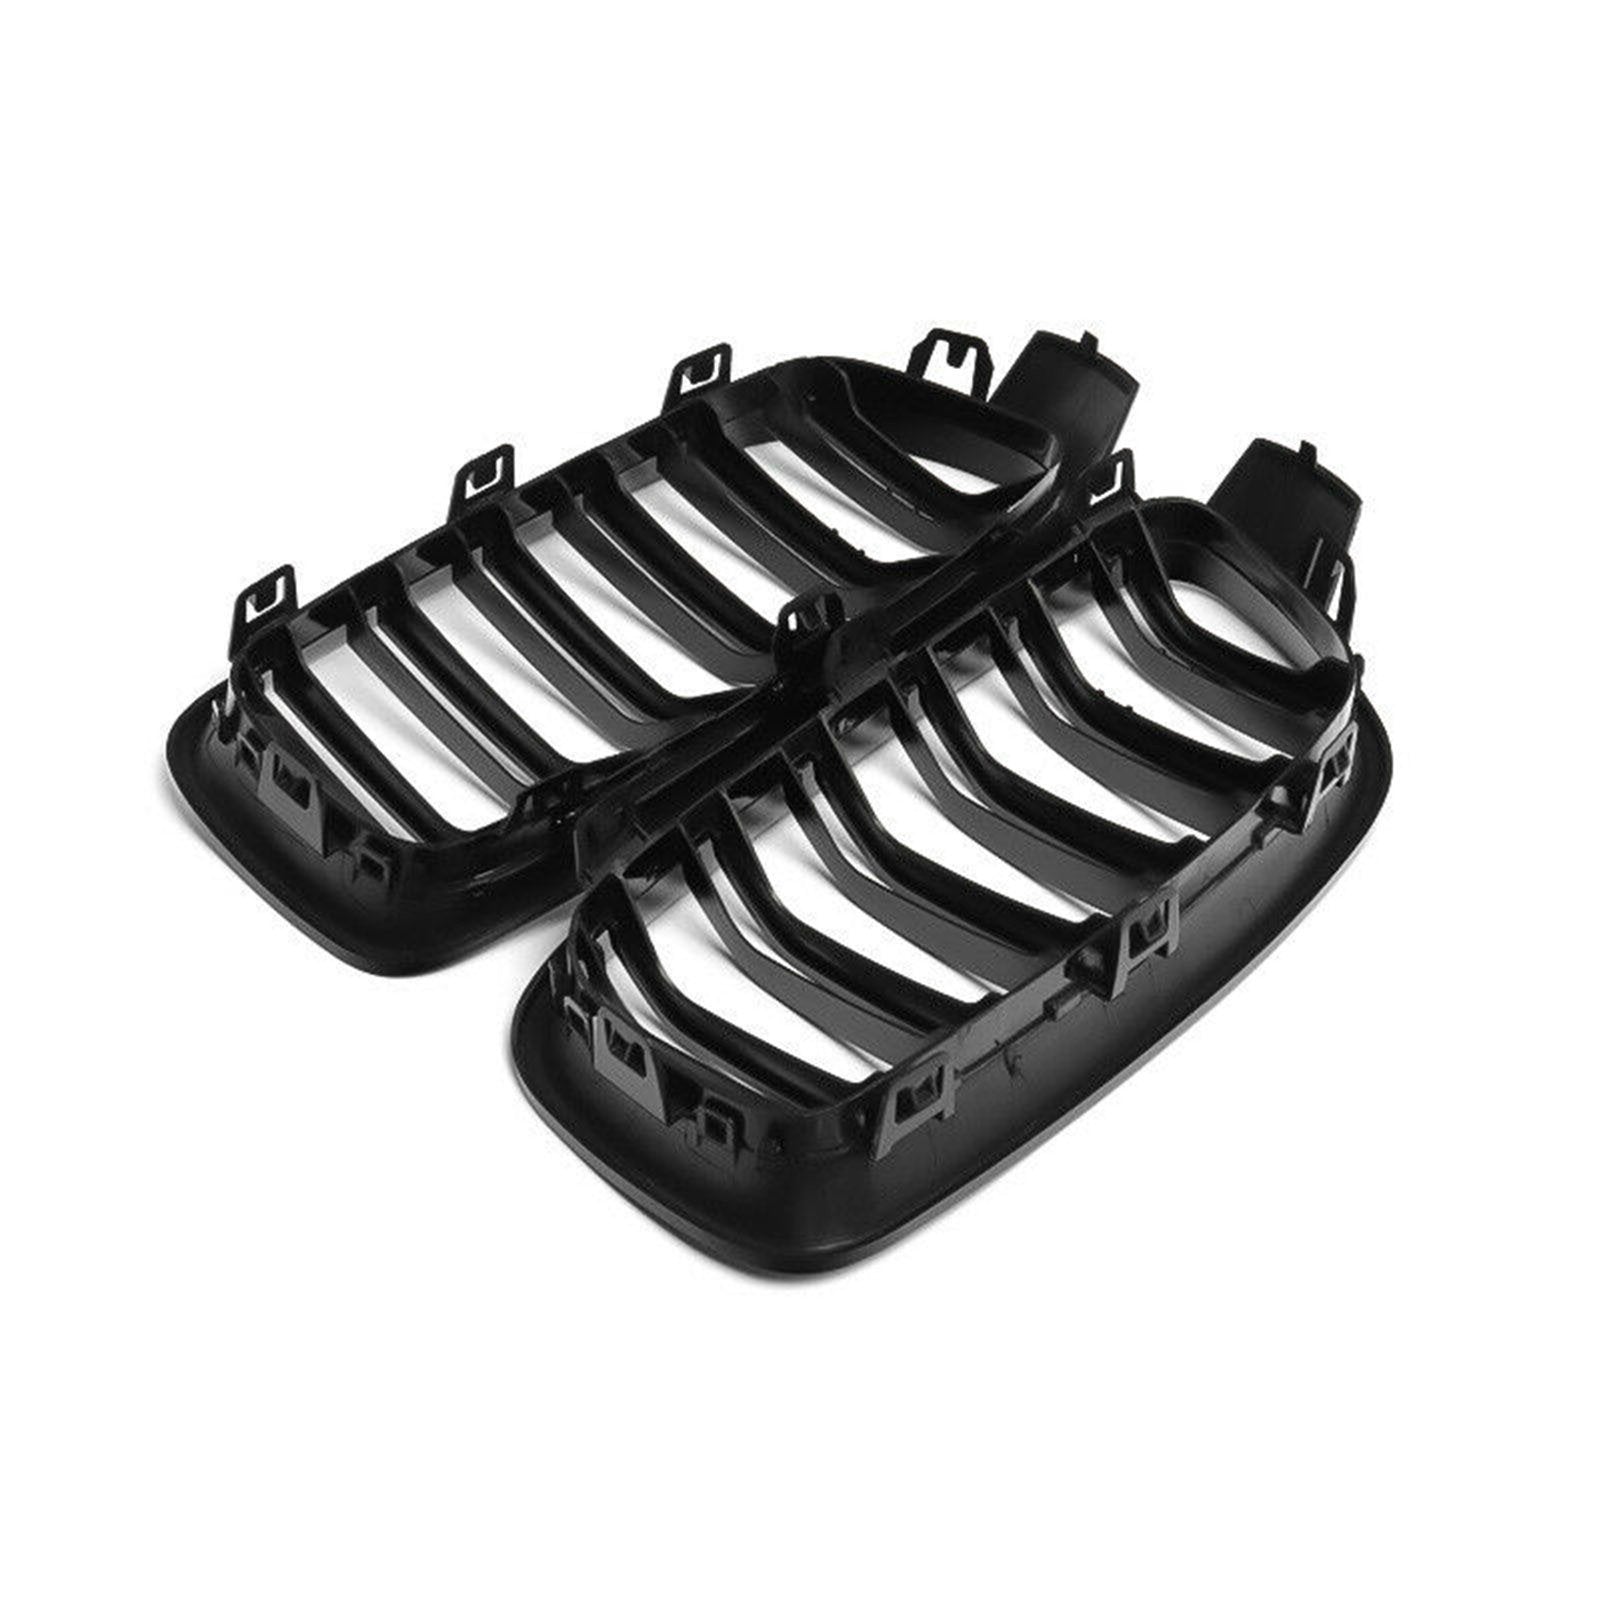 2PCs Gloss Black Front Bumper Hood Kidney Grille Double Line Racing Replacement for BMW F30 F31 F35 3 Series 2012-2016